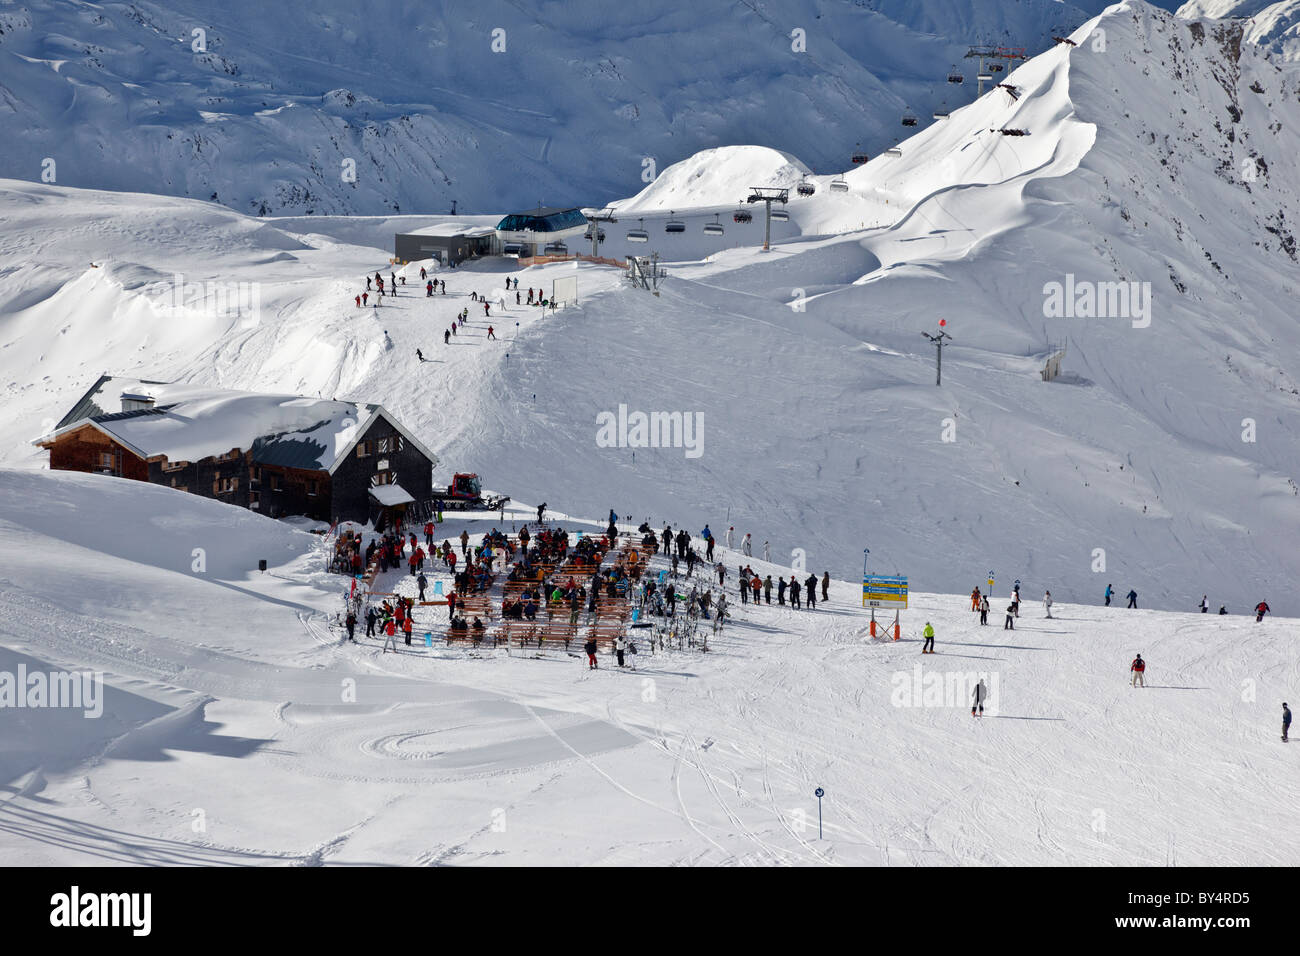 Skiers and snowboarders stop for a break at the famous Ulmer Hutte in St Anton.  The Valfagehr chairlift is in the distance. Stock Photo